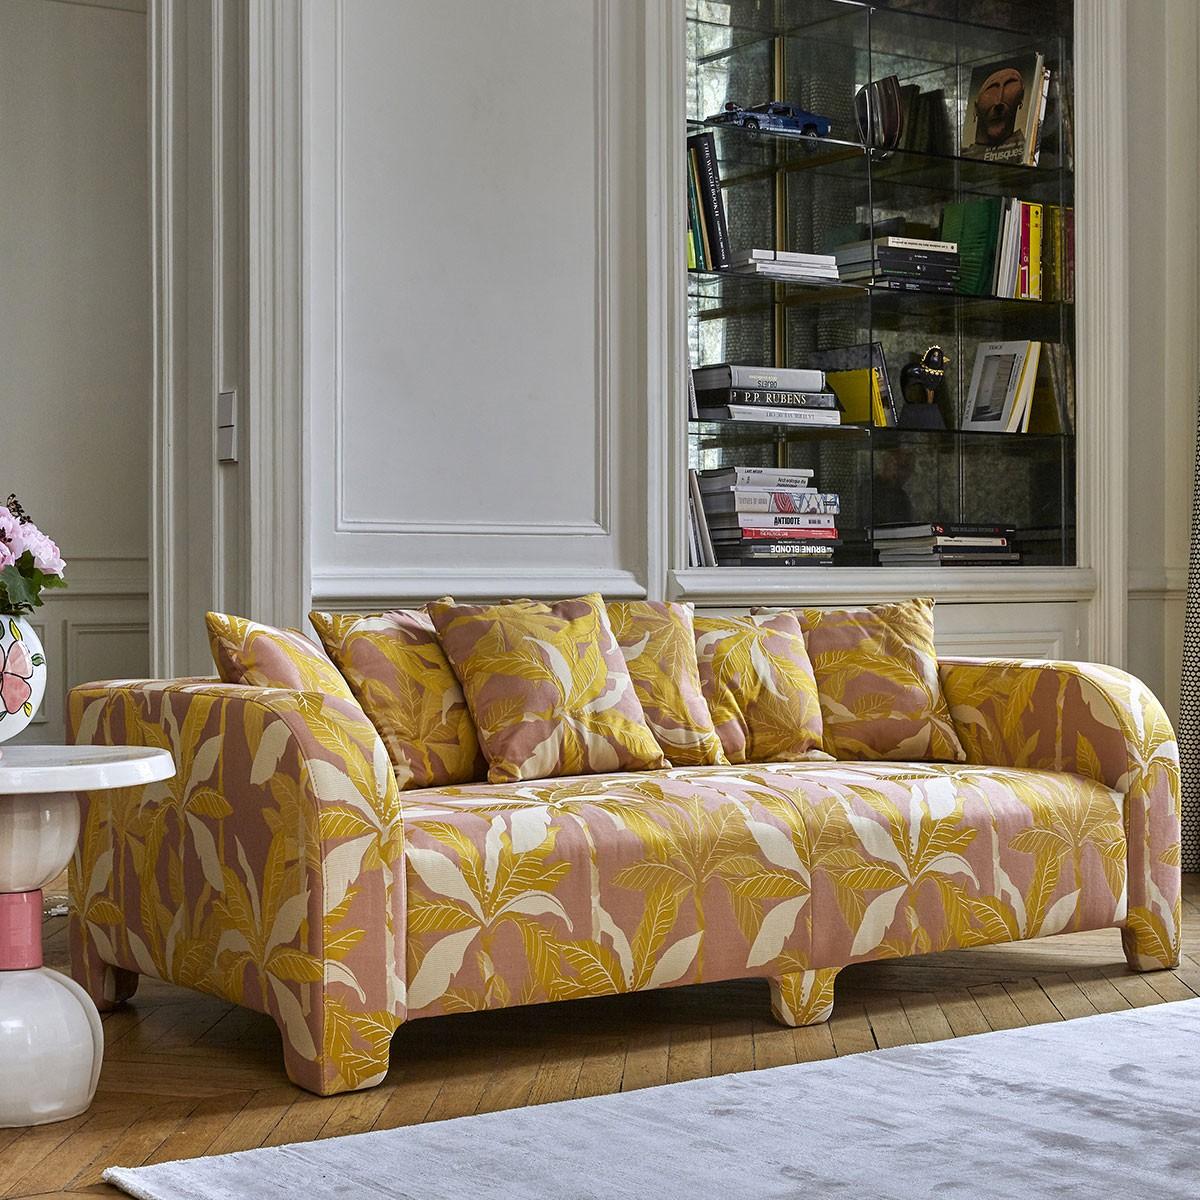 Popus Editions Graziella 4-Seater Sofa in Mole Malmoe Terry Upholstery In New Condition For Sale In Paris, FR